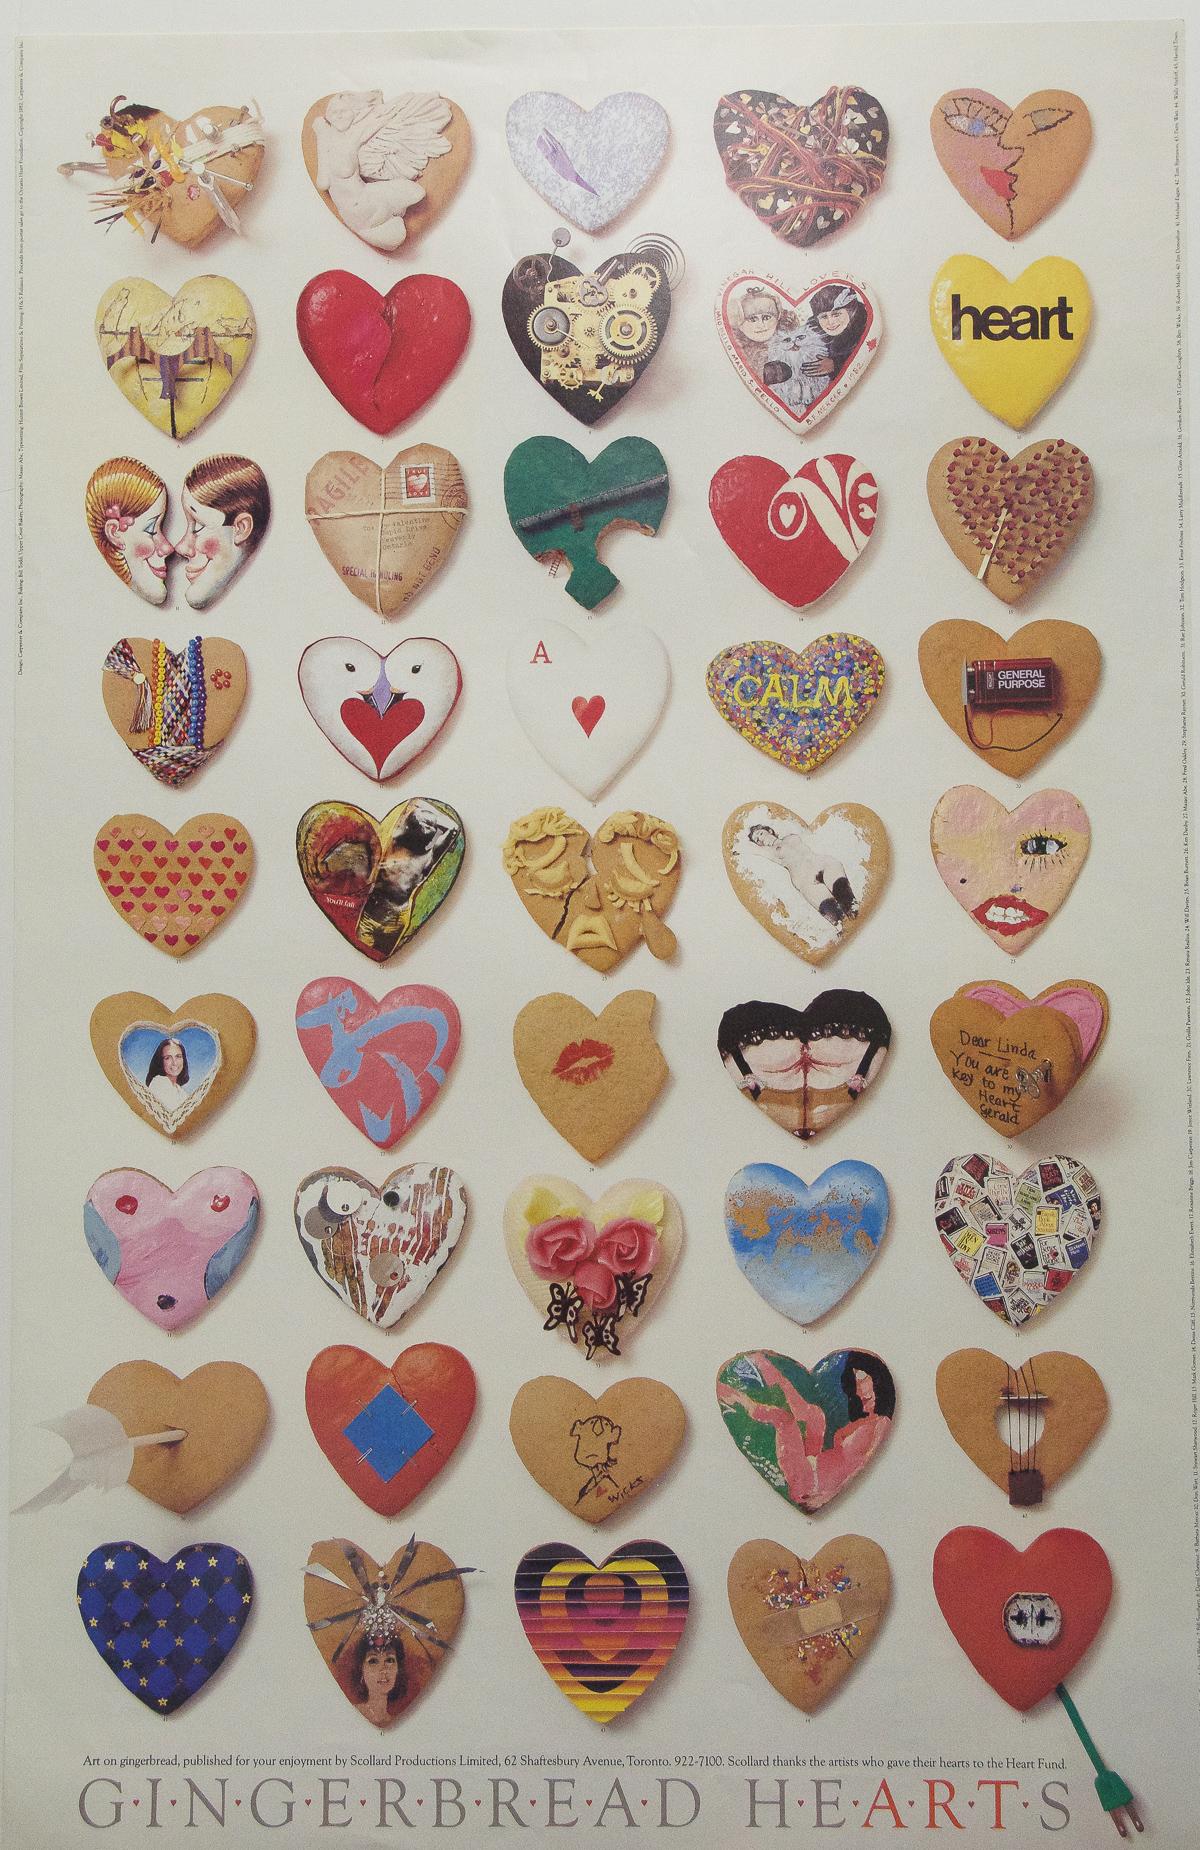 Masao Abe Print - "Gingerbread Hearts" Lithograph event poster for Heart Fund, Published in 1982. 